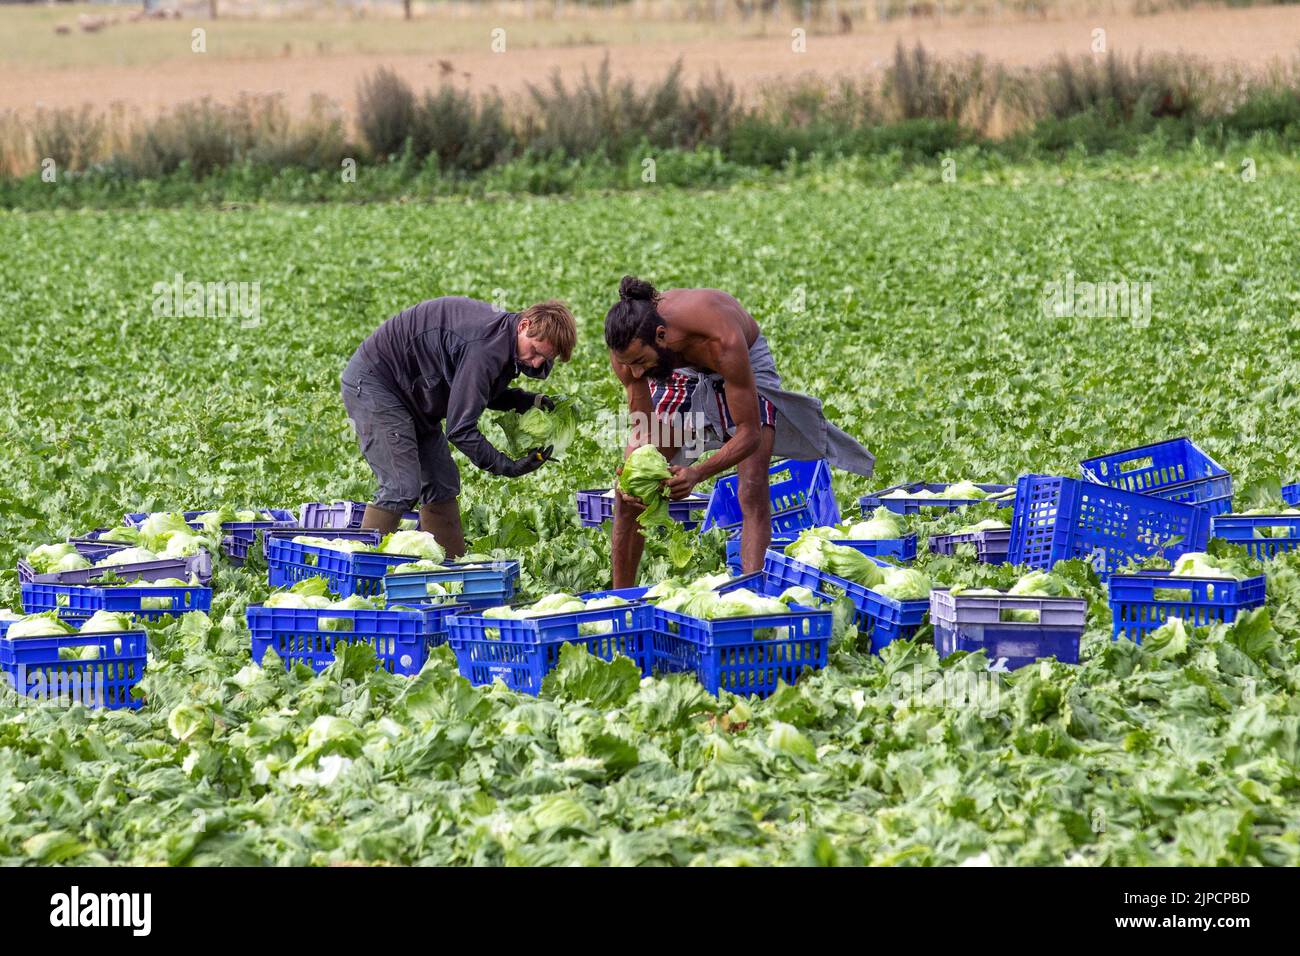 Tarleton, Lancashire. UK Weather. 17th August 2022.  EU Migrant workers harvesting cabbages after extreme heat spoils some of this season's crop in the 'Salad Bowl' area of northwest England.  They can easily spoil if not carefully harvested and stored,  timing is critical, as overripe cabbage loses quality quickly. Credit; MediaWorldImages/AlamyLiveNews. Stock Photo